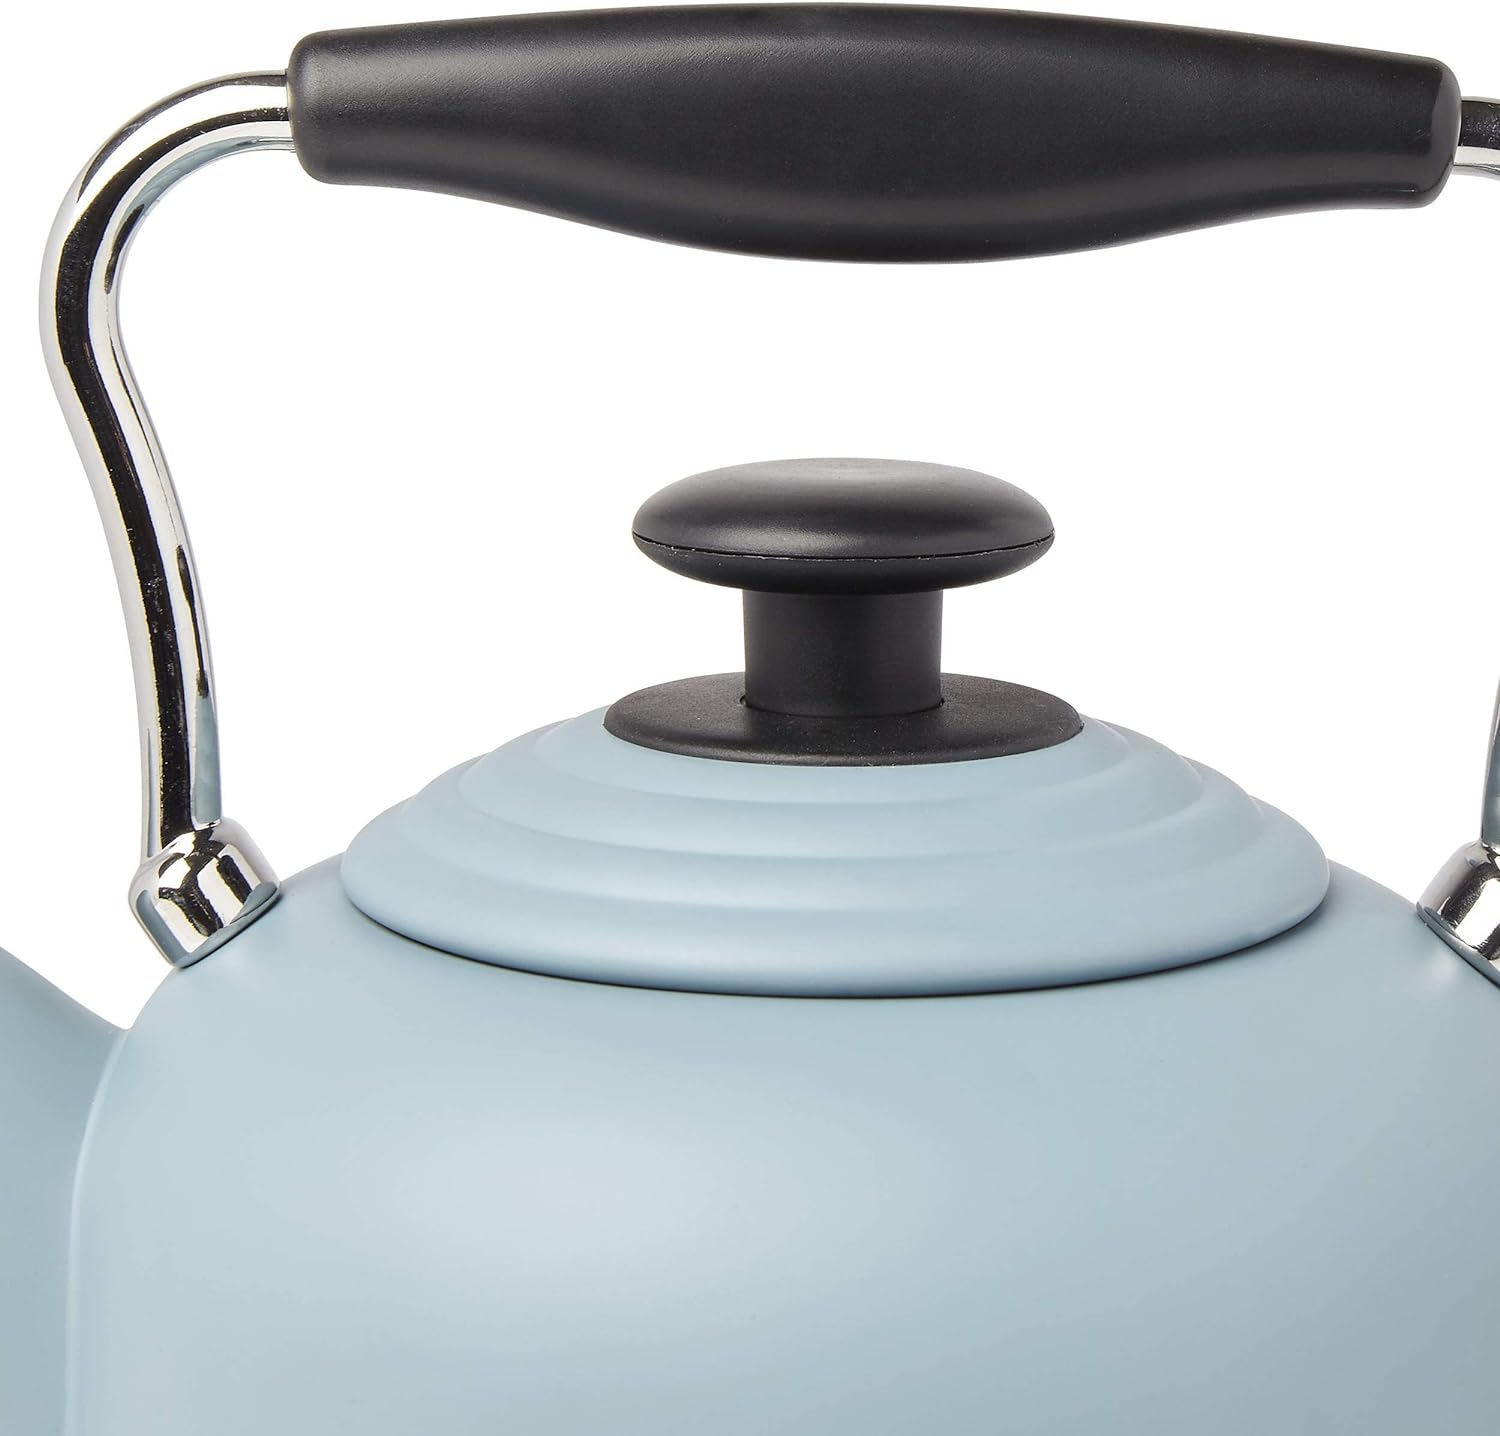 https://bigbigmart.com/wp-content/uploads/2023/10/Haden-75025-HIGHCLERE-Vintage-Retro-1.5-Liter-6-Cup-Capacity-Innovative-Cordless-Electric-Stainless-Steel-Tea-Pot-Kettle-with-360-Degree-Base-Pool-Blue5.jpg